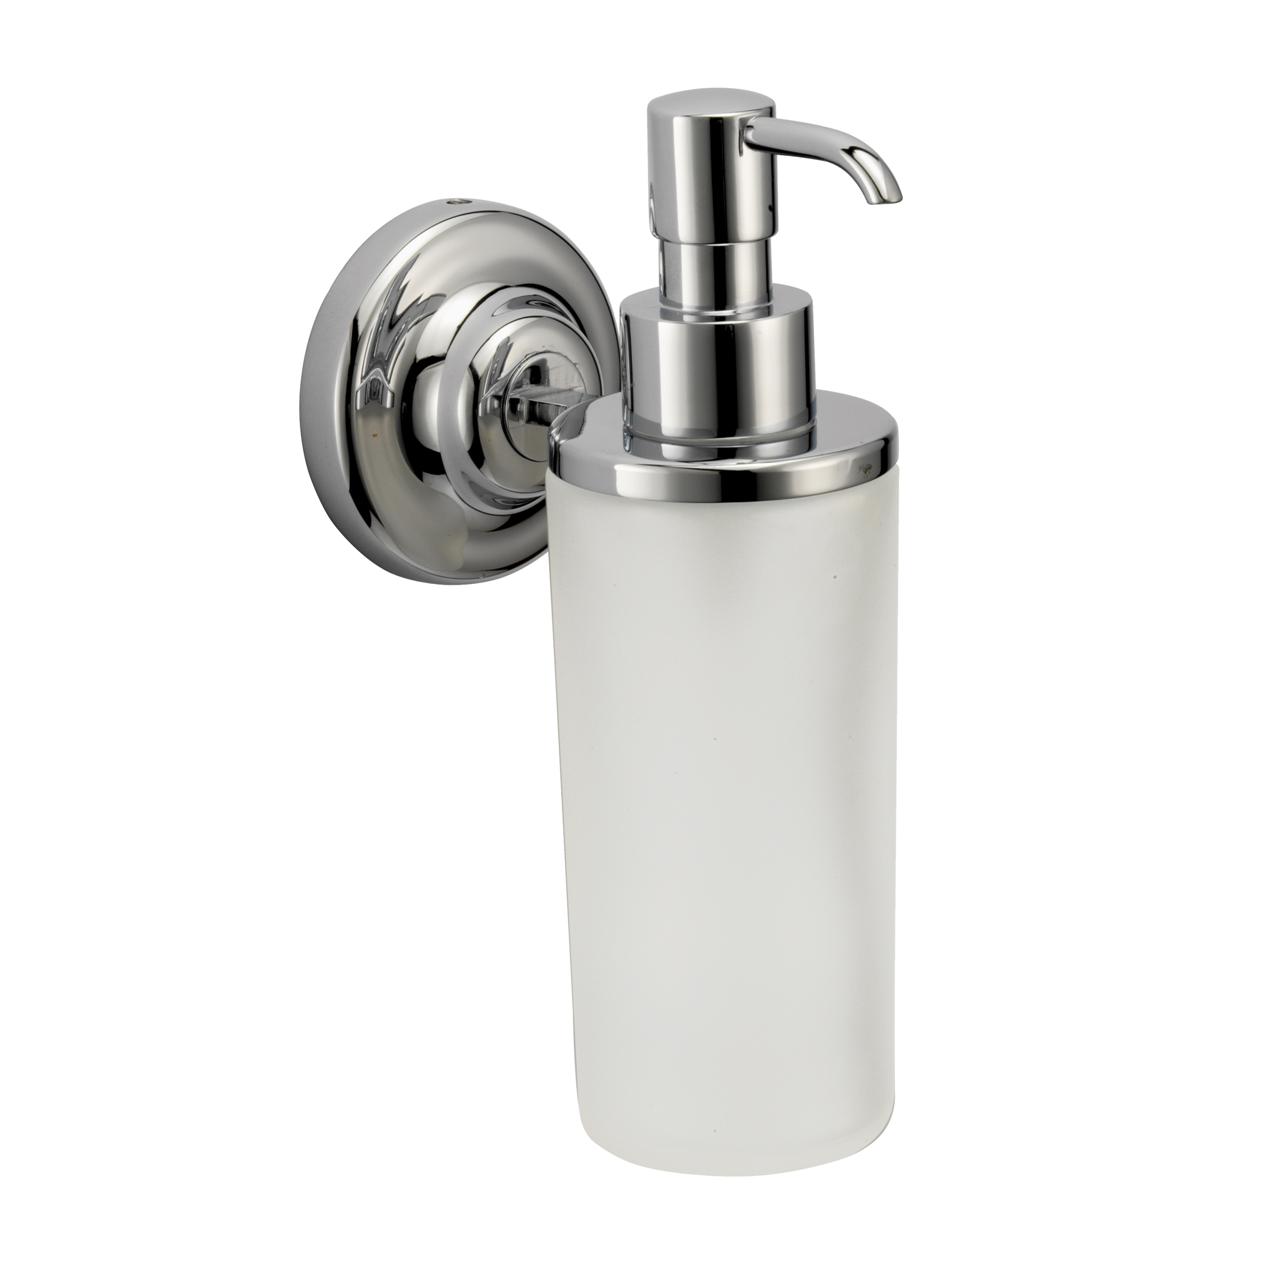 Soap dispenser wall mounted n18 